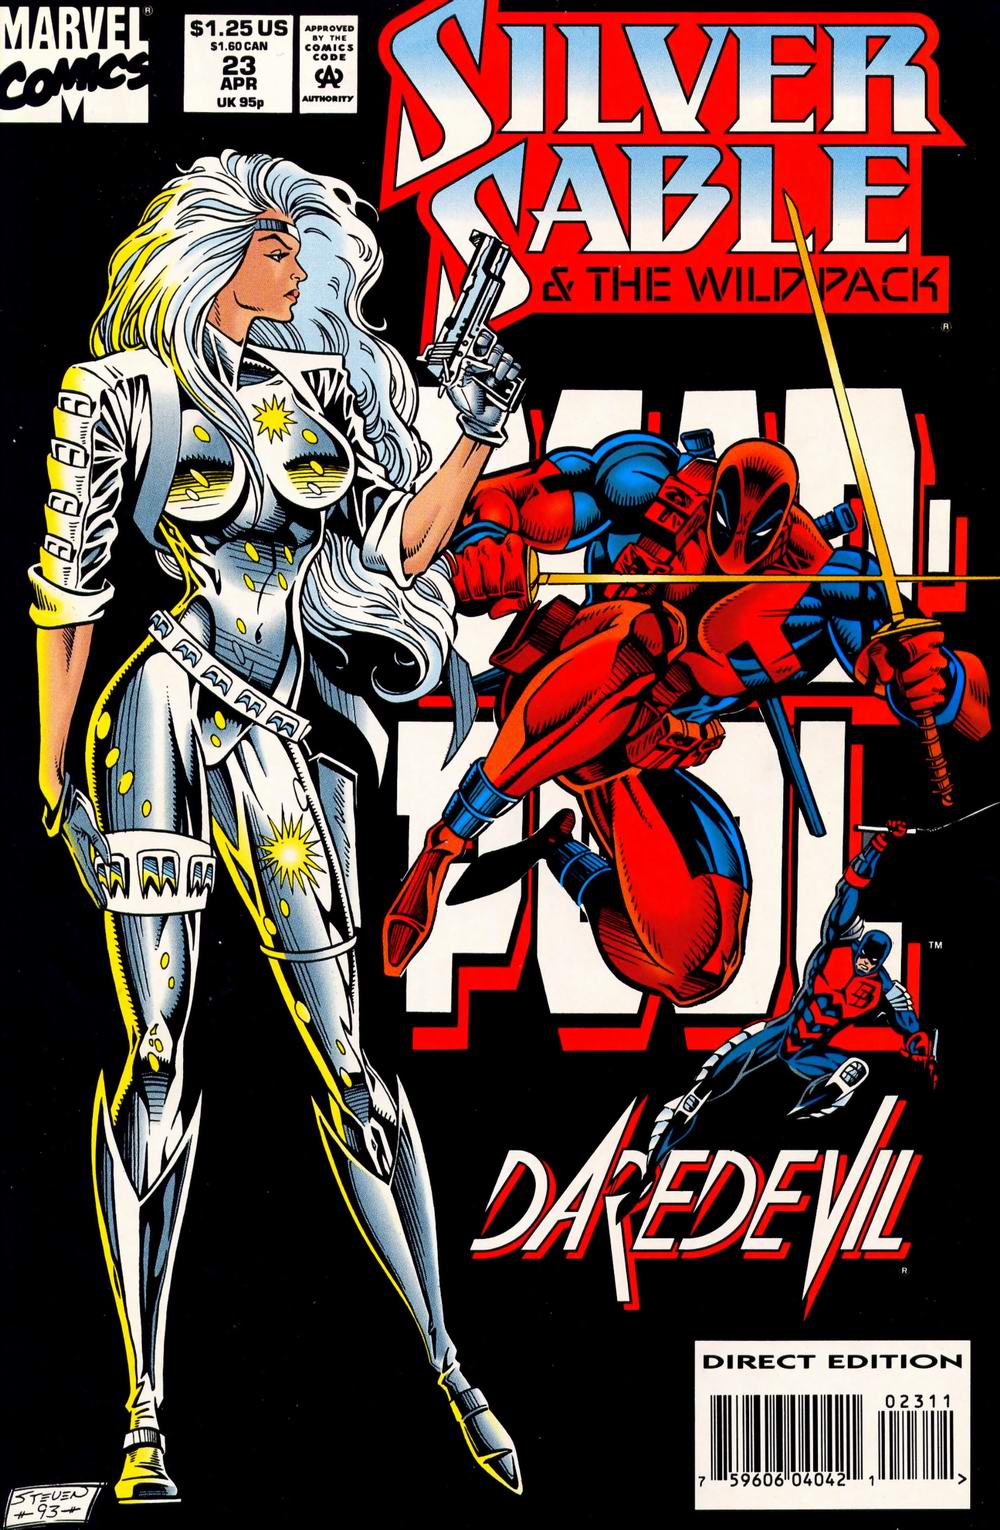 Read online Silver Sable and the Wild Pack comic -  Issue #23 - 1